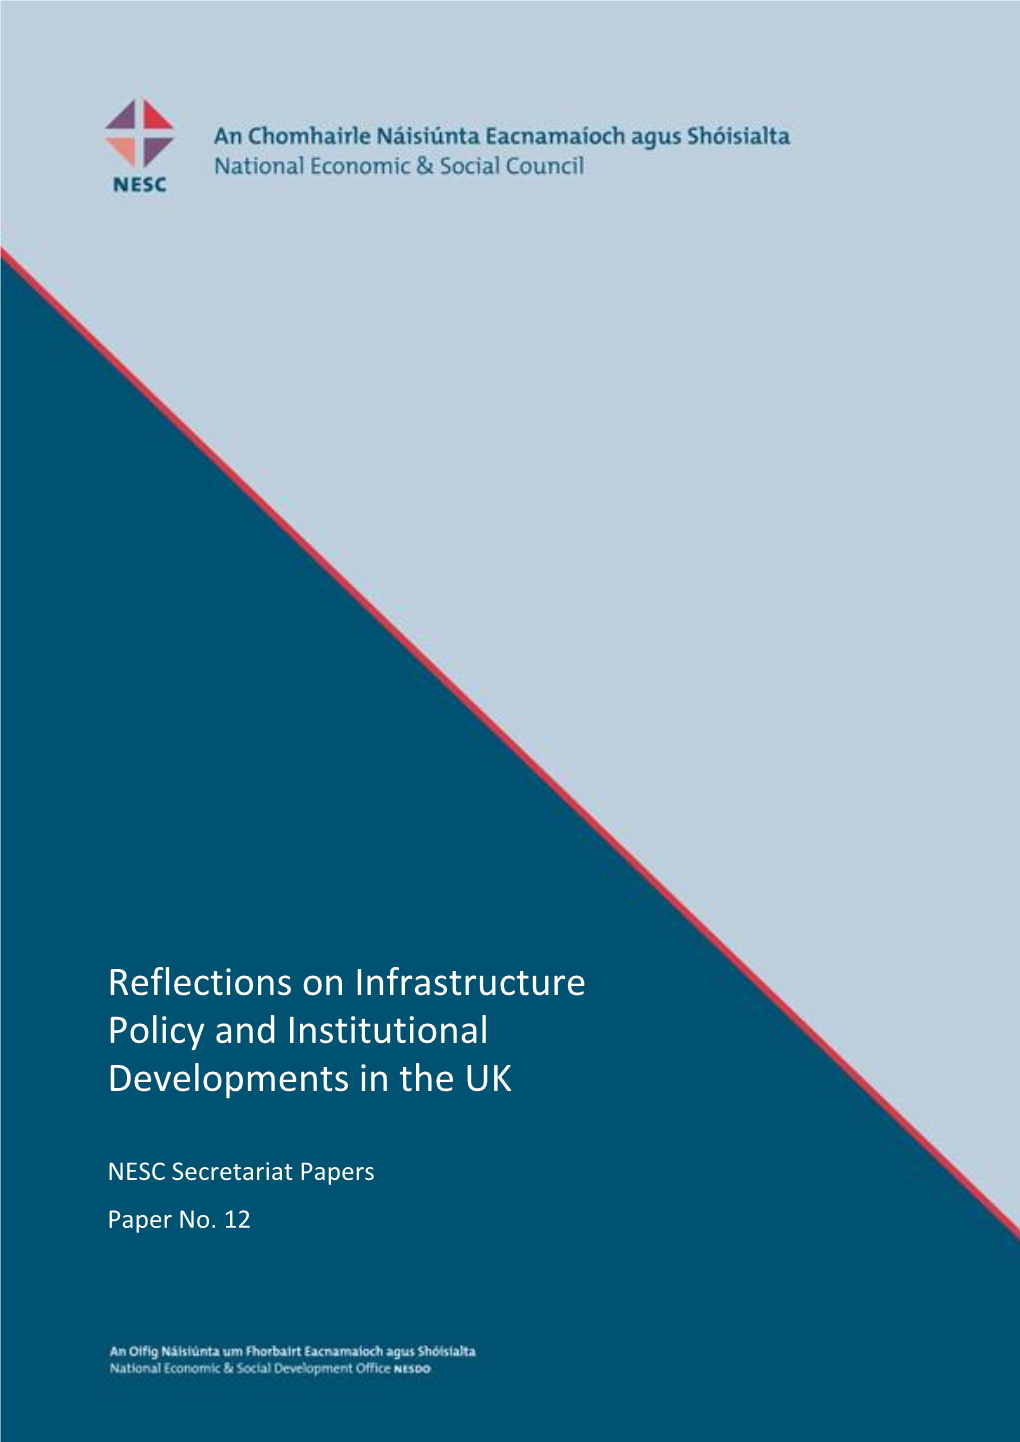 Reflections on Infrastructure Policy and Institutional Developments in the UK